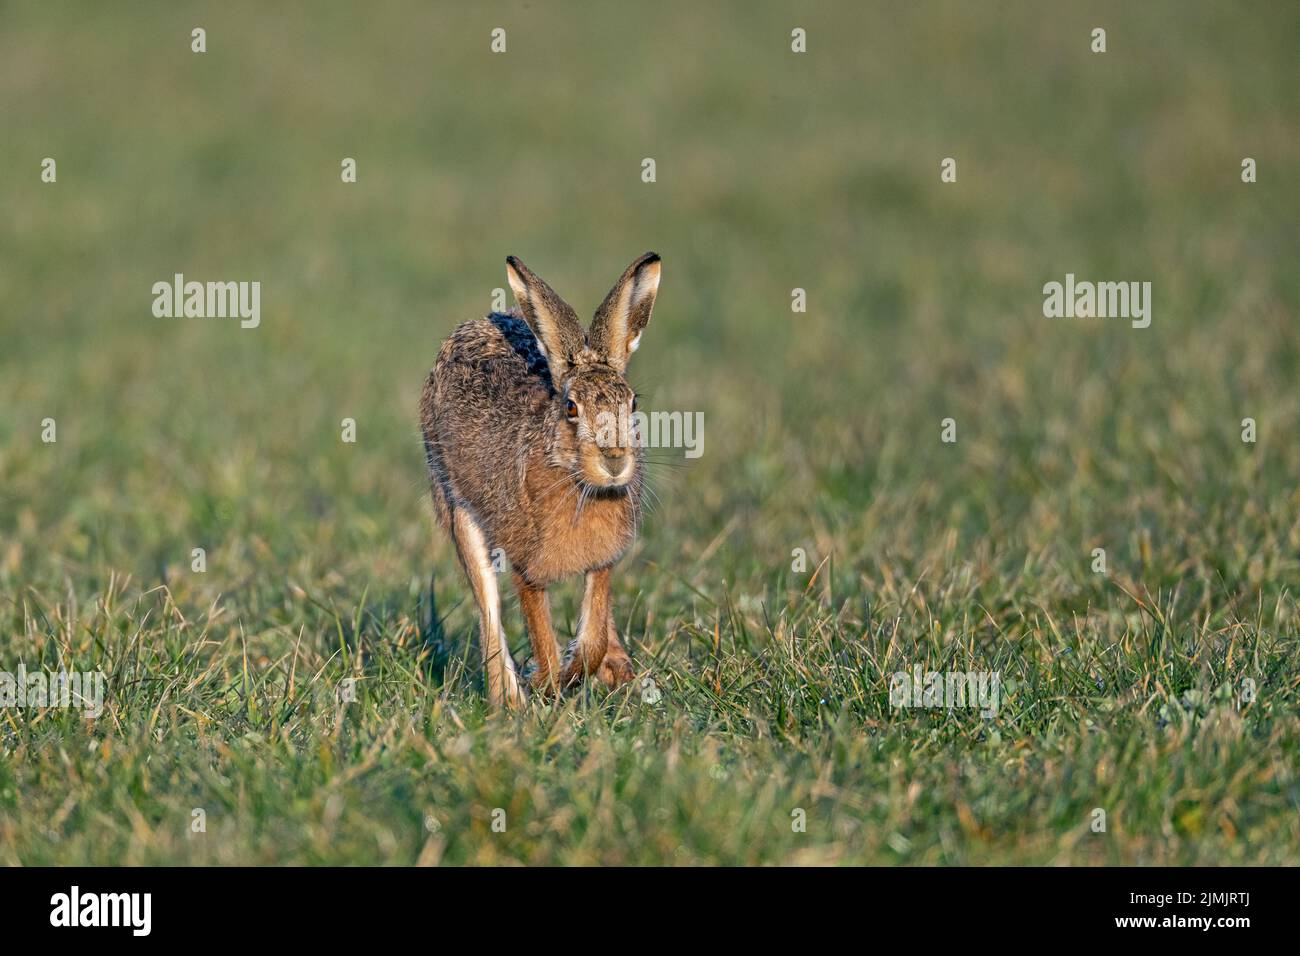 Zielstrebig hoppelt ein maennlicher Feldhase in Richtung Haesin / Determinedly scampers a male European Hare in the direction of a female / Lepus euro Stock Photo